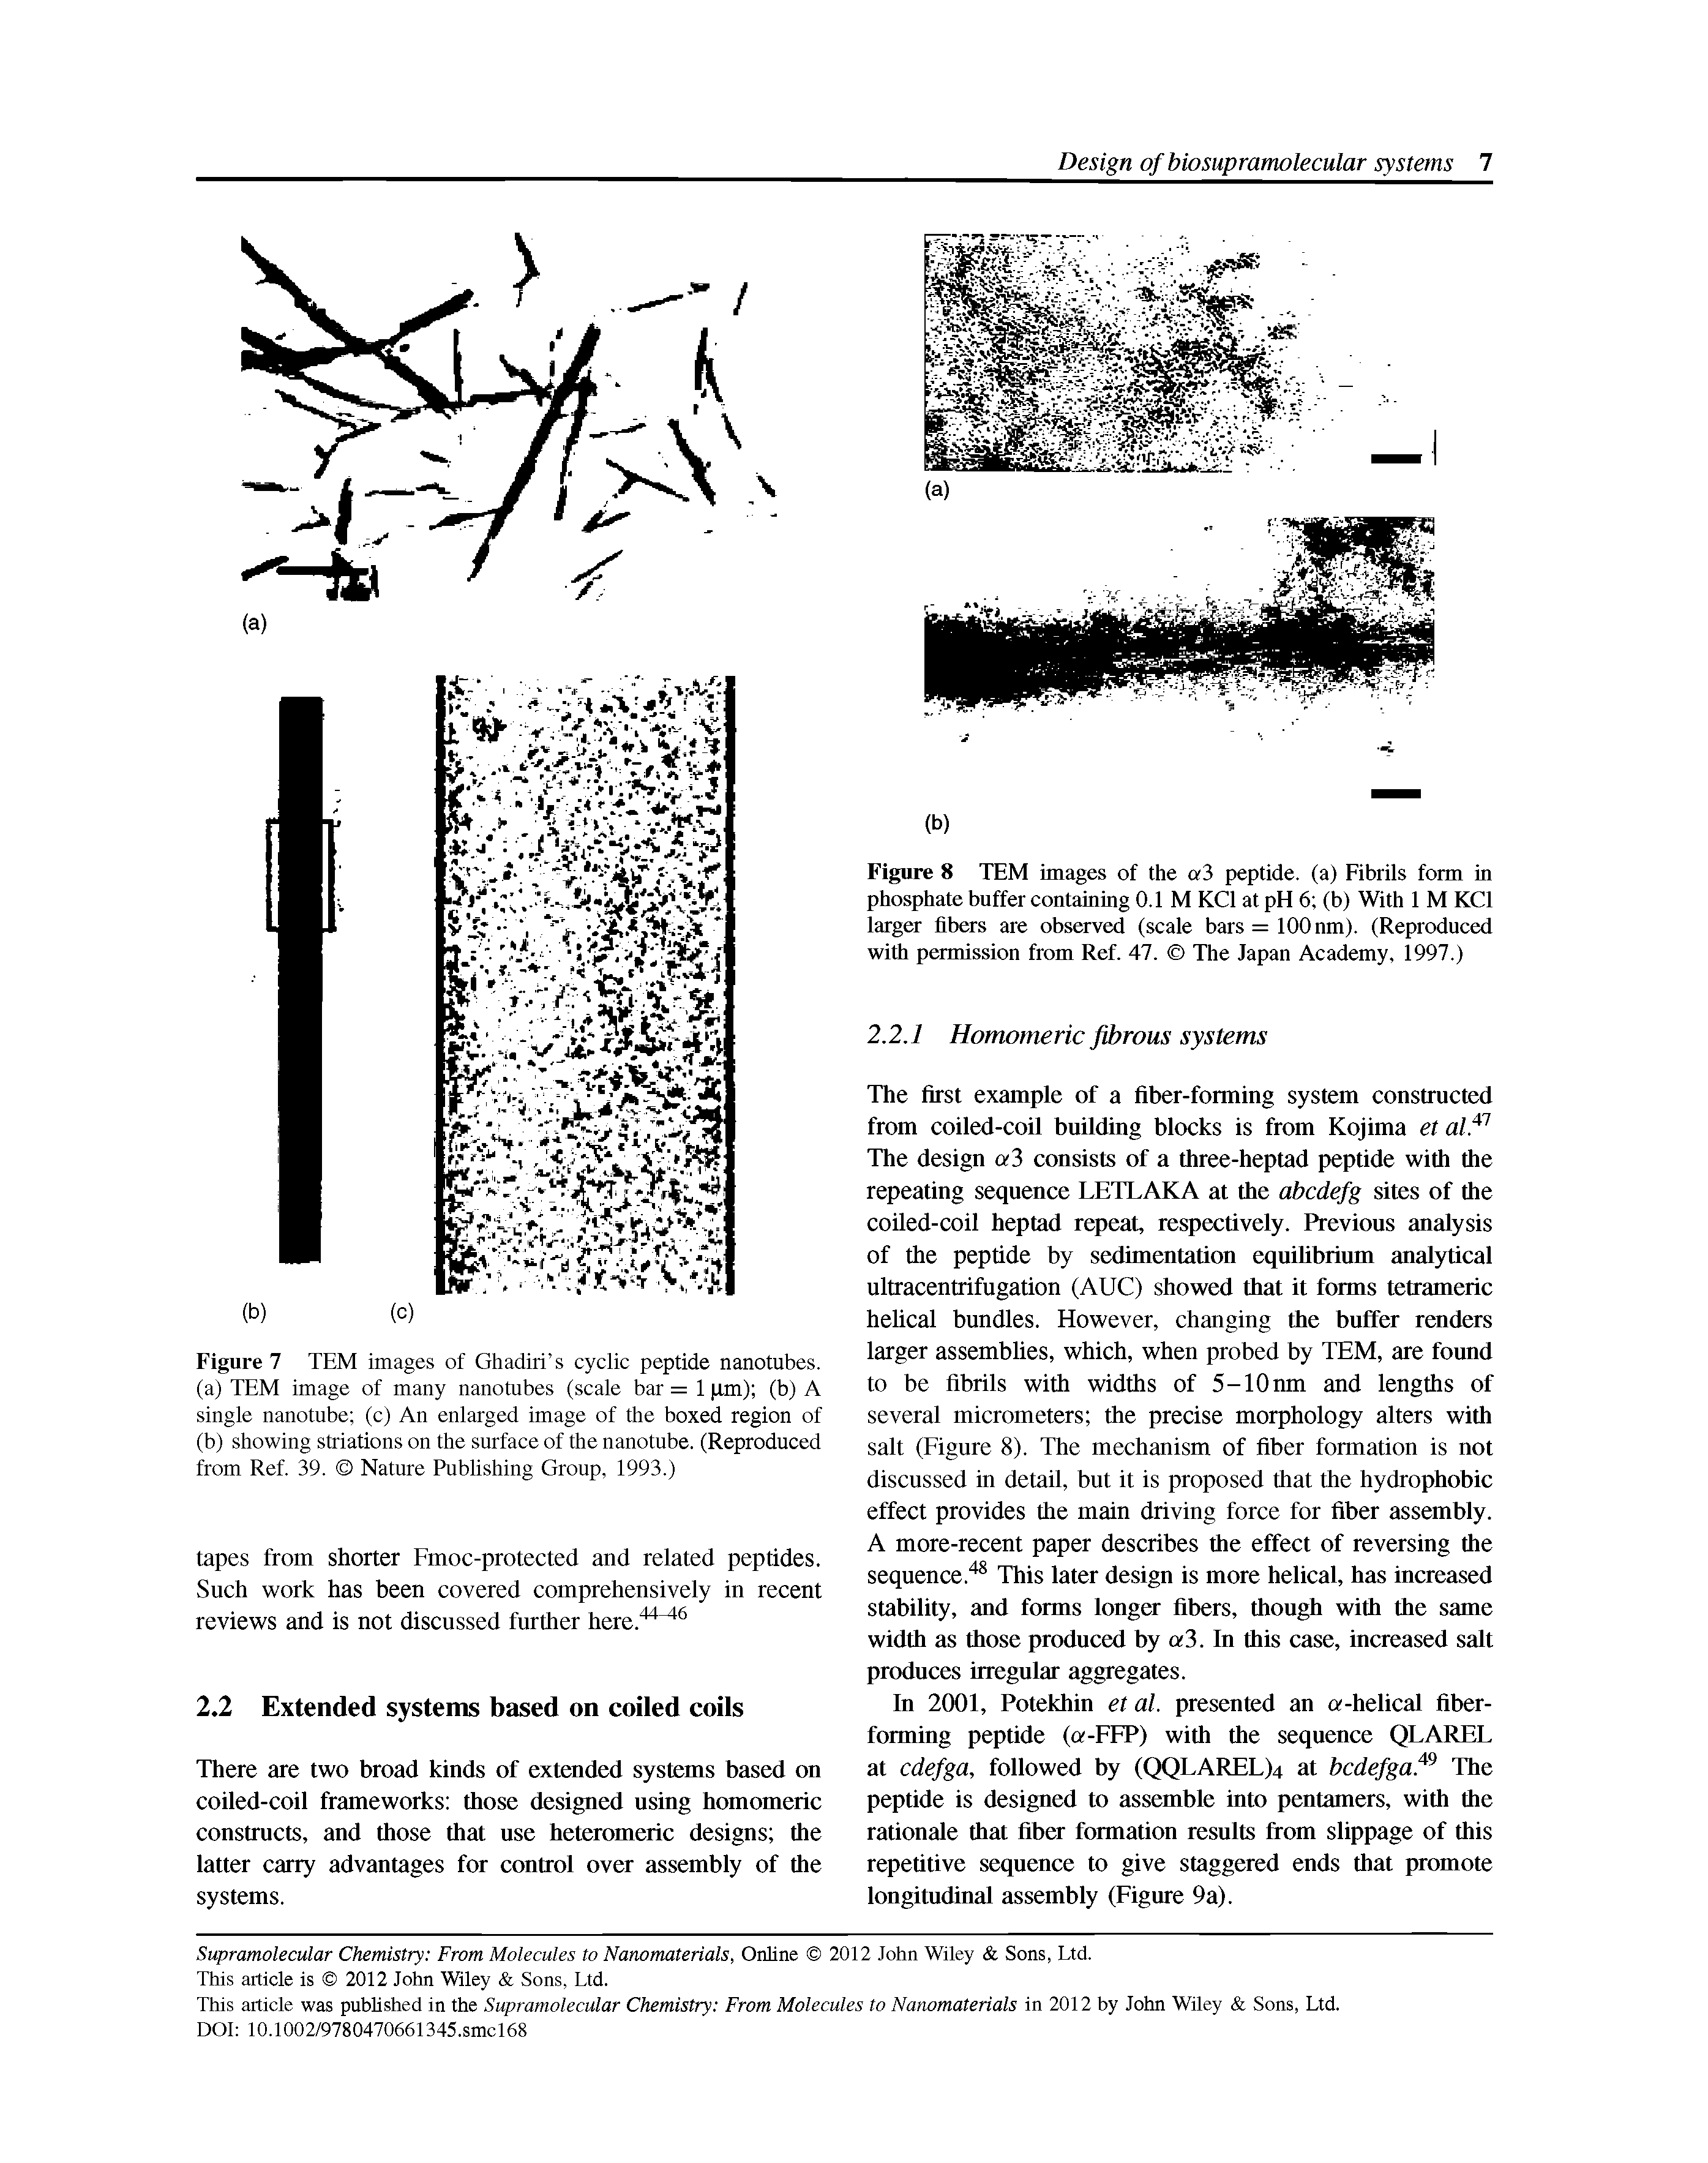 Figure 8 TEM images of the a3 peptide, (a) Fibrils form in phosphate buffer containing 0.1 M KCl at pH 6 (b) With 1 M KCl larger fibers are observed (scale bars = 100 nm). (Reproduced with permission from Ref. 47. The Japan Academy, 1997.)...